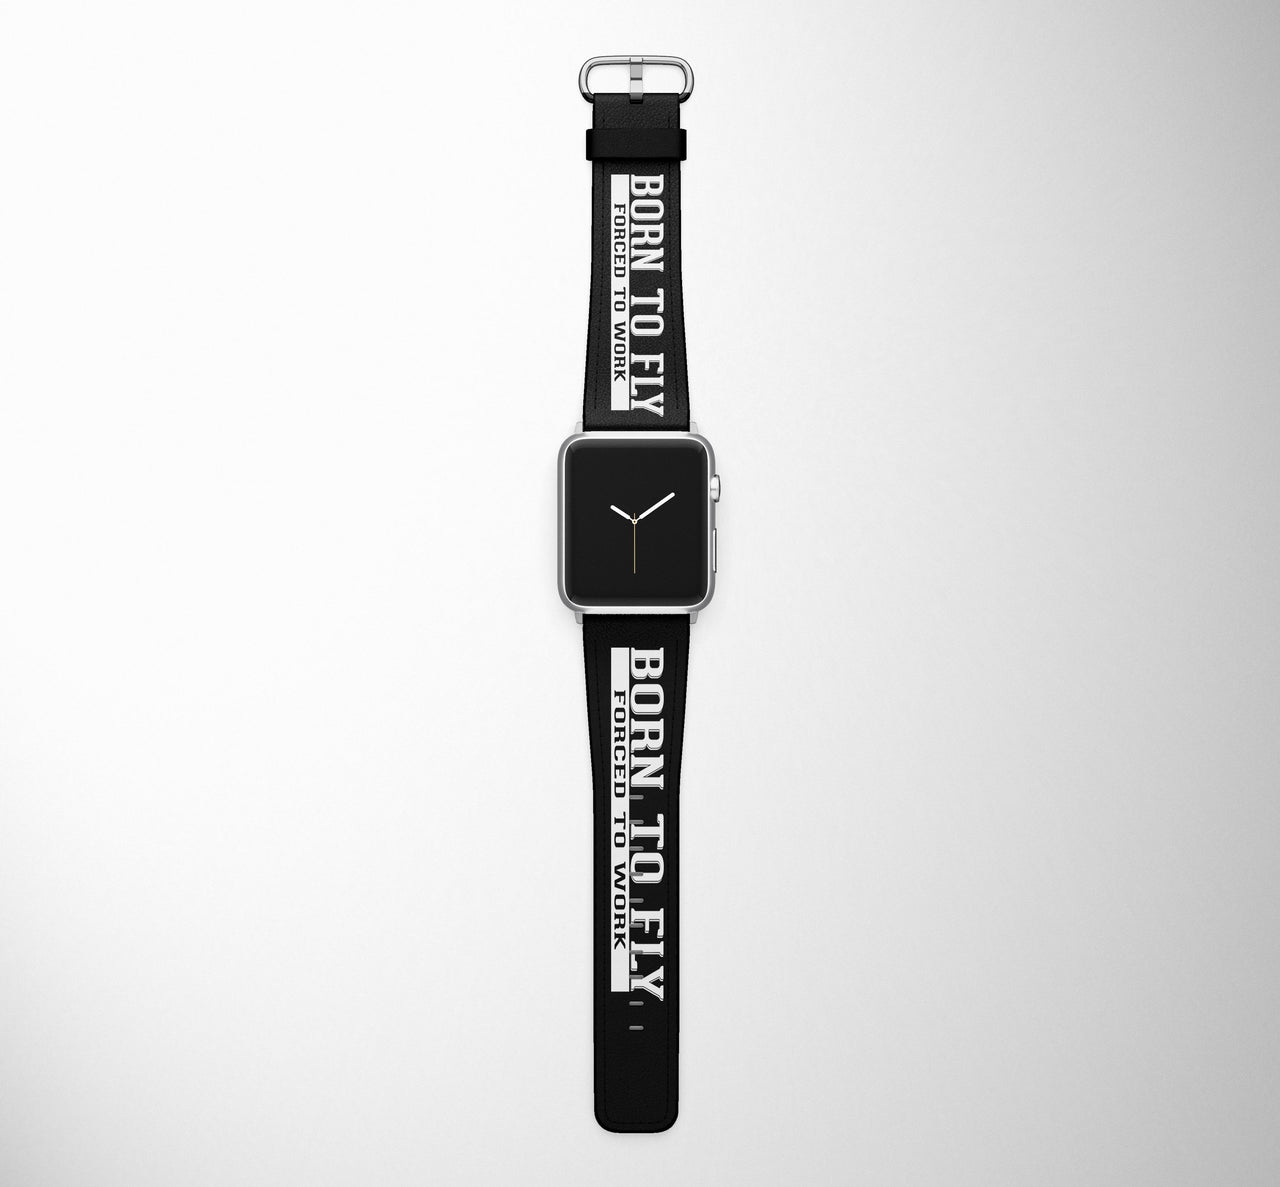 Born To Fly - Forced to Work Designed Leather Apple Watch Straps